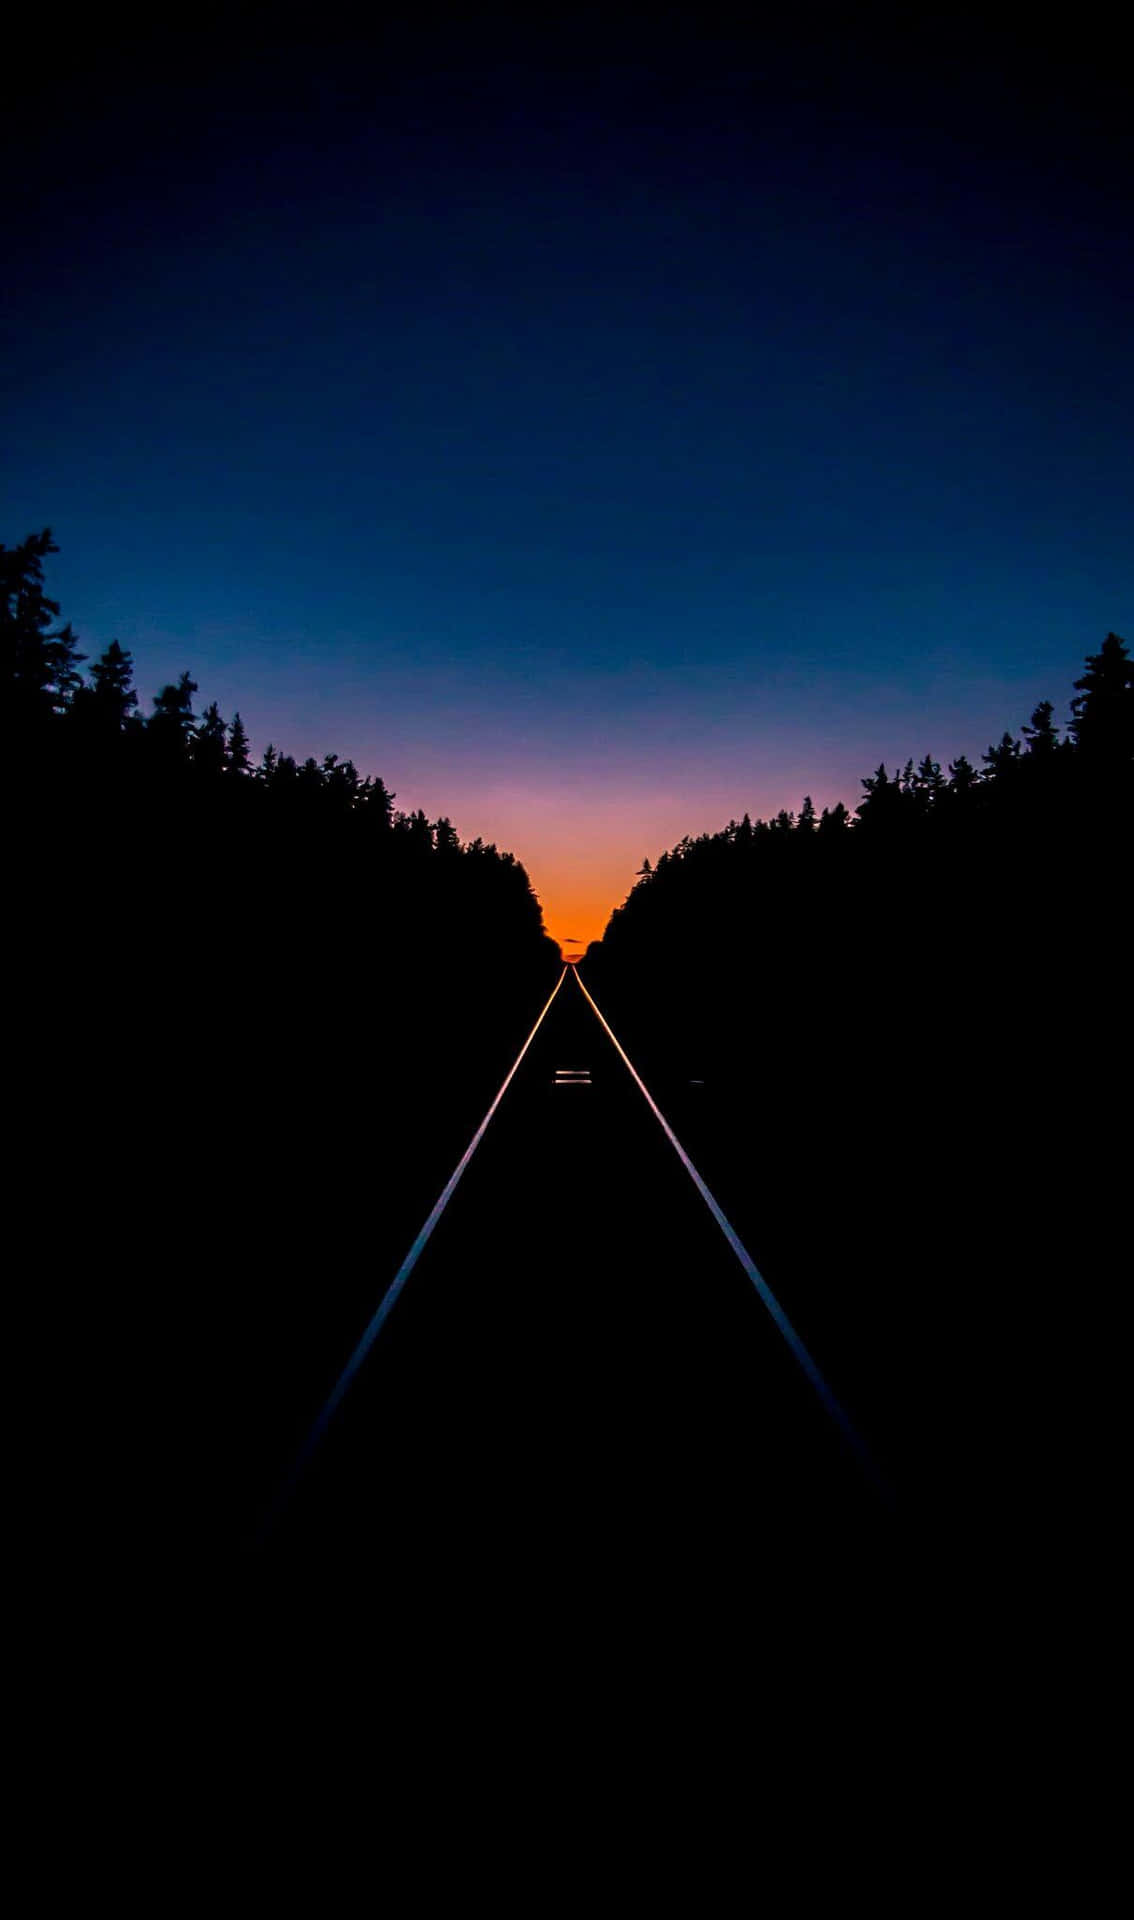 A Train Track With A Sunset Behind It